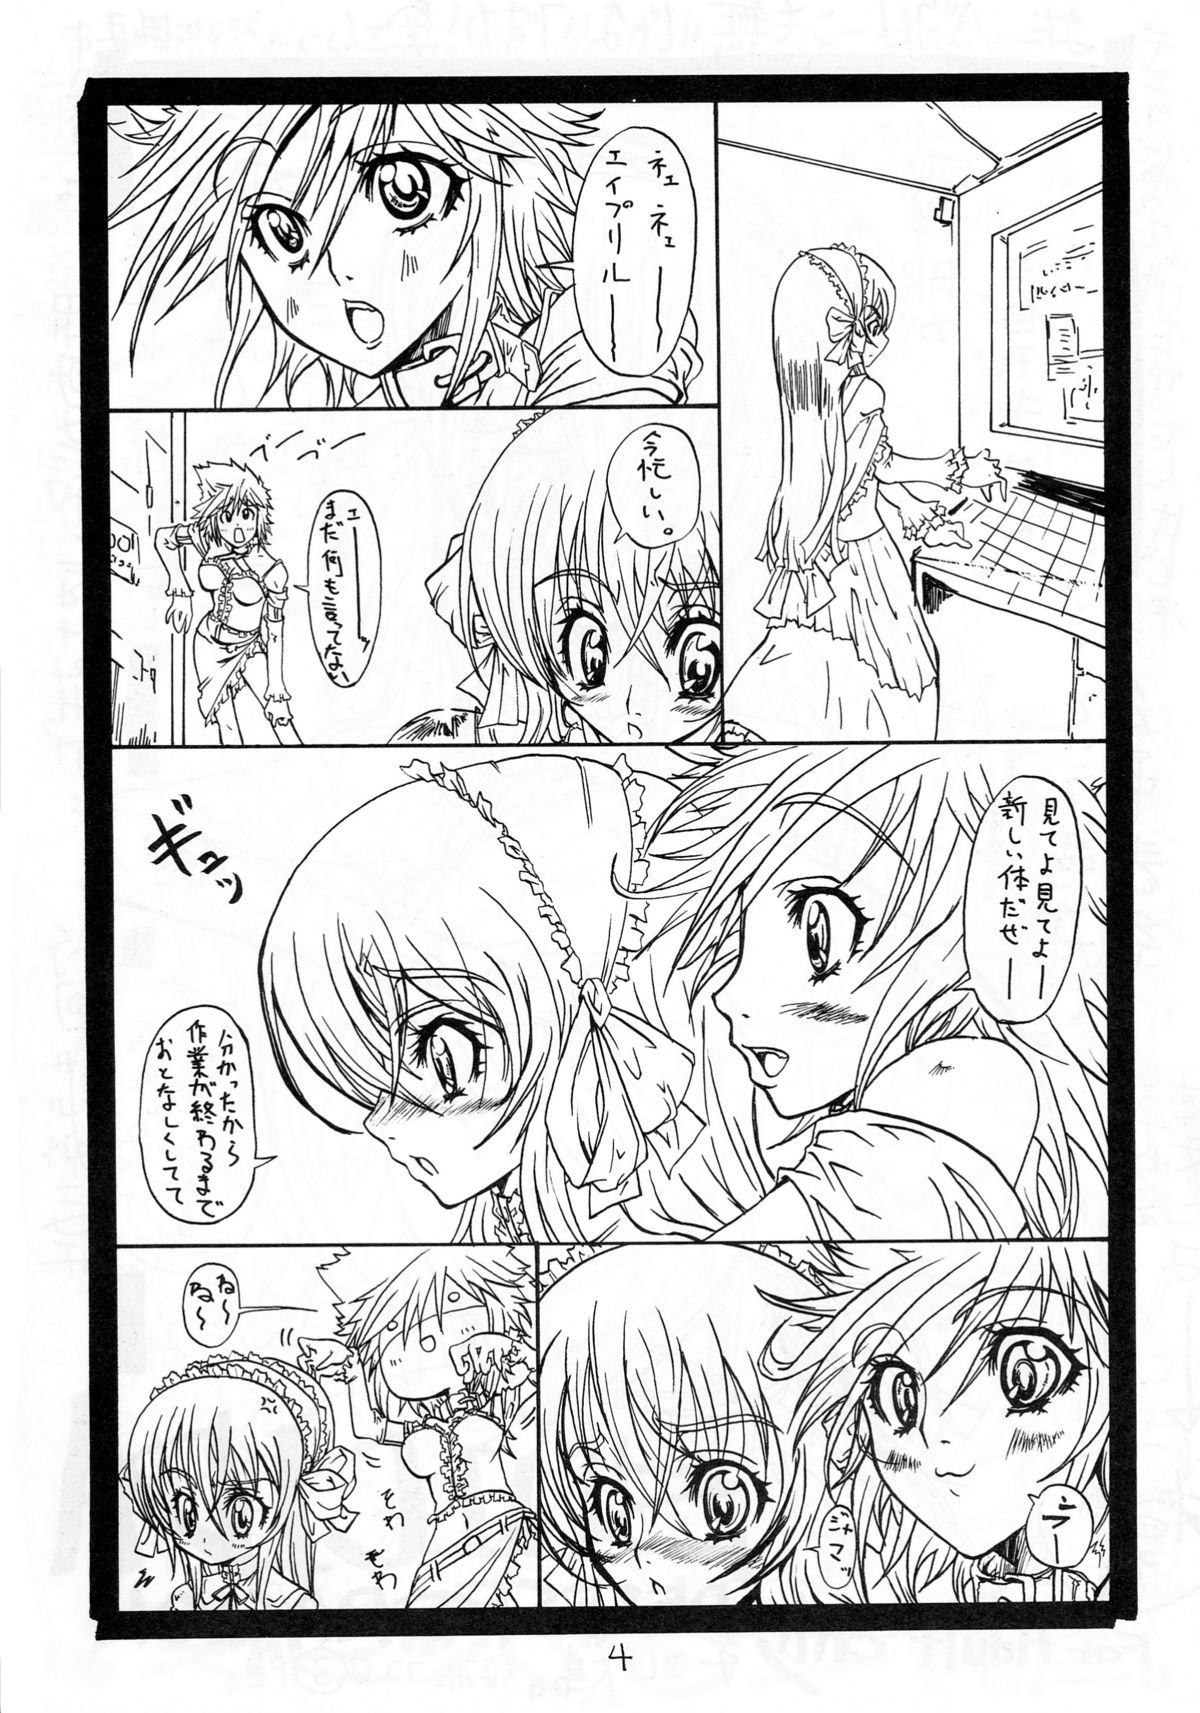 (C71) [S-G.H. (Oona Mitsutoshi)] SUICIDA DESESPERACION (Coyote Ragtime Show) page 4 full